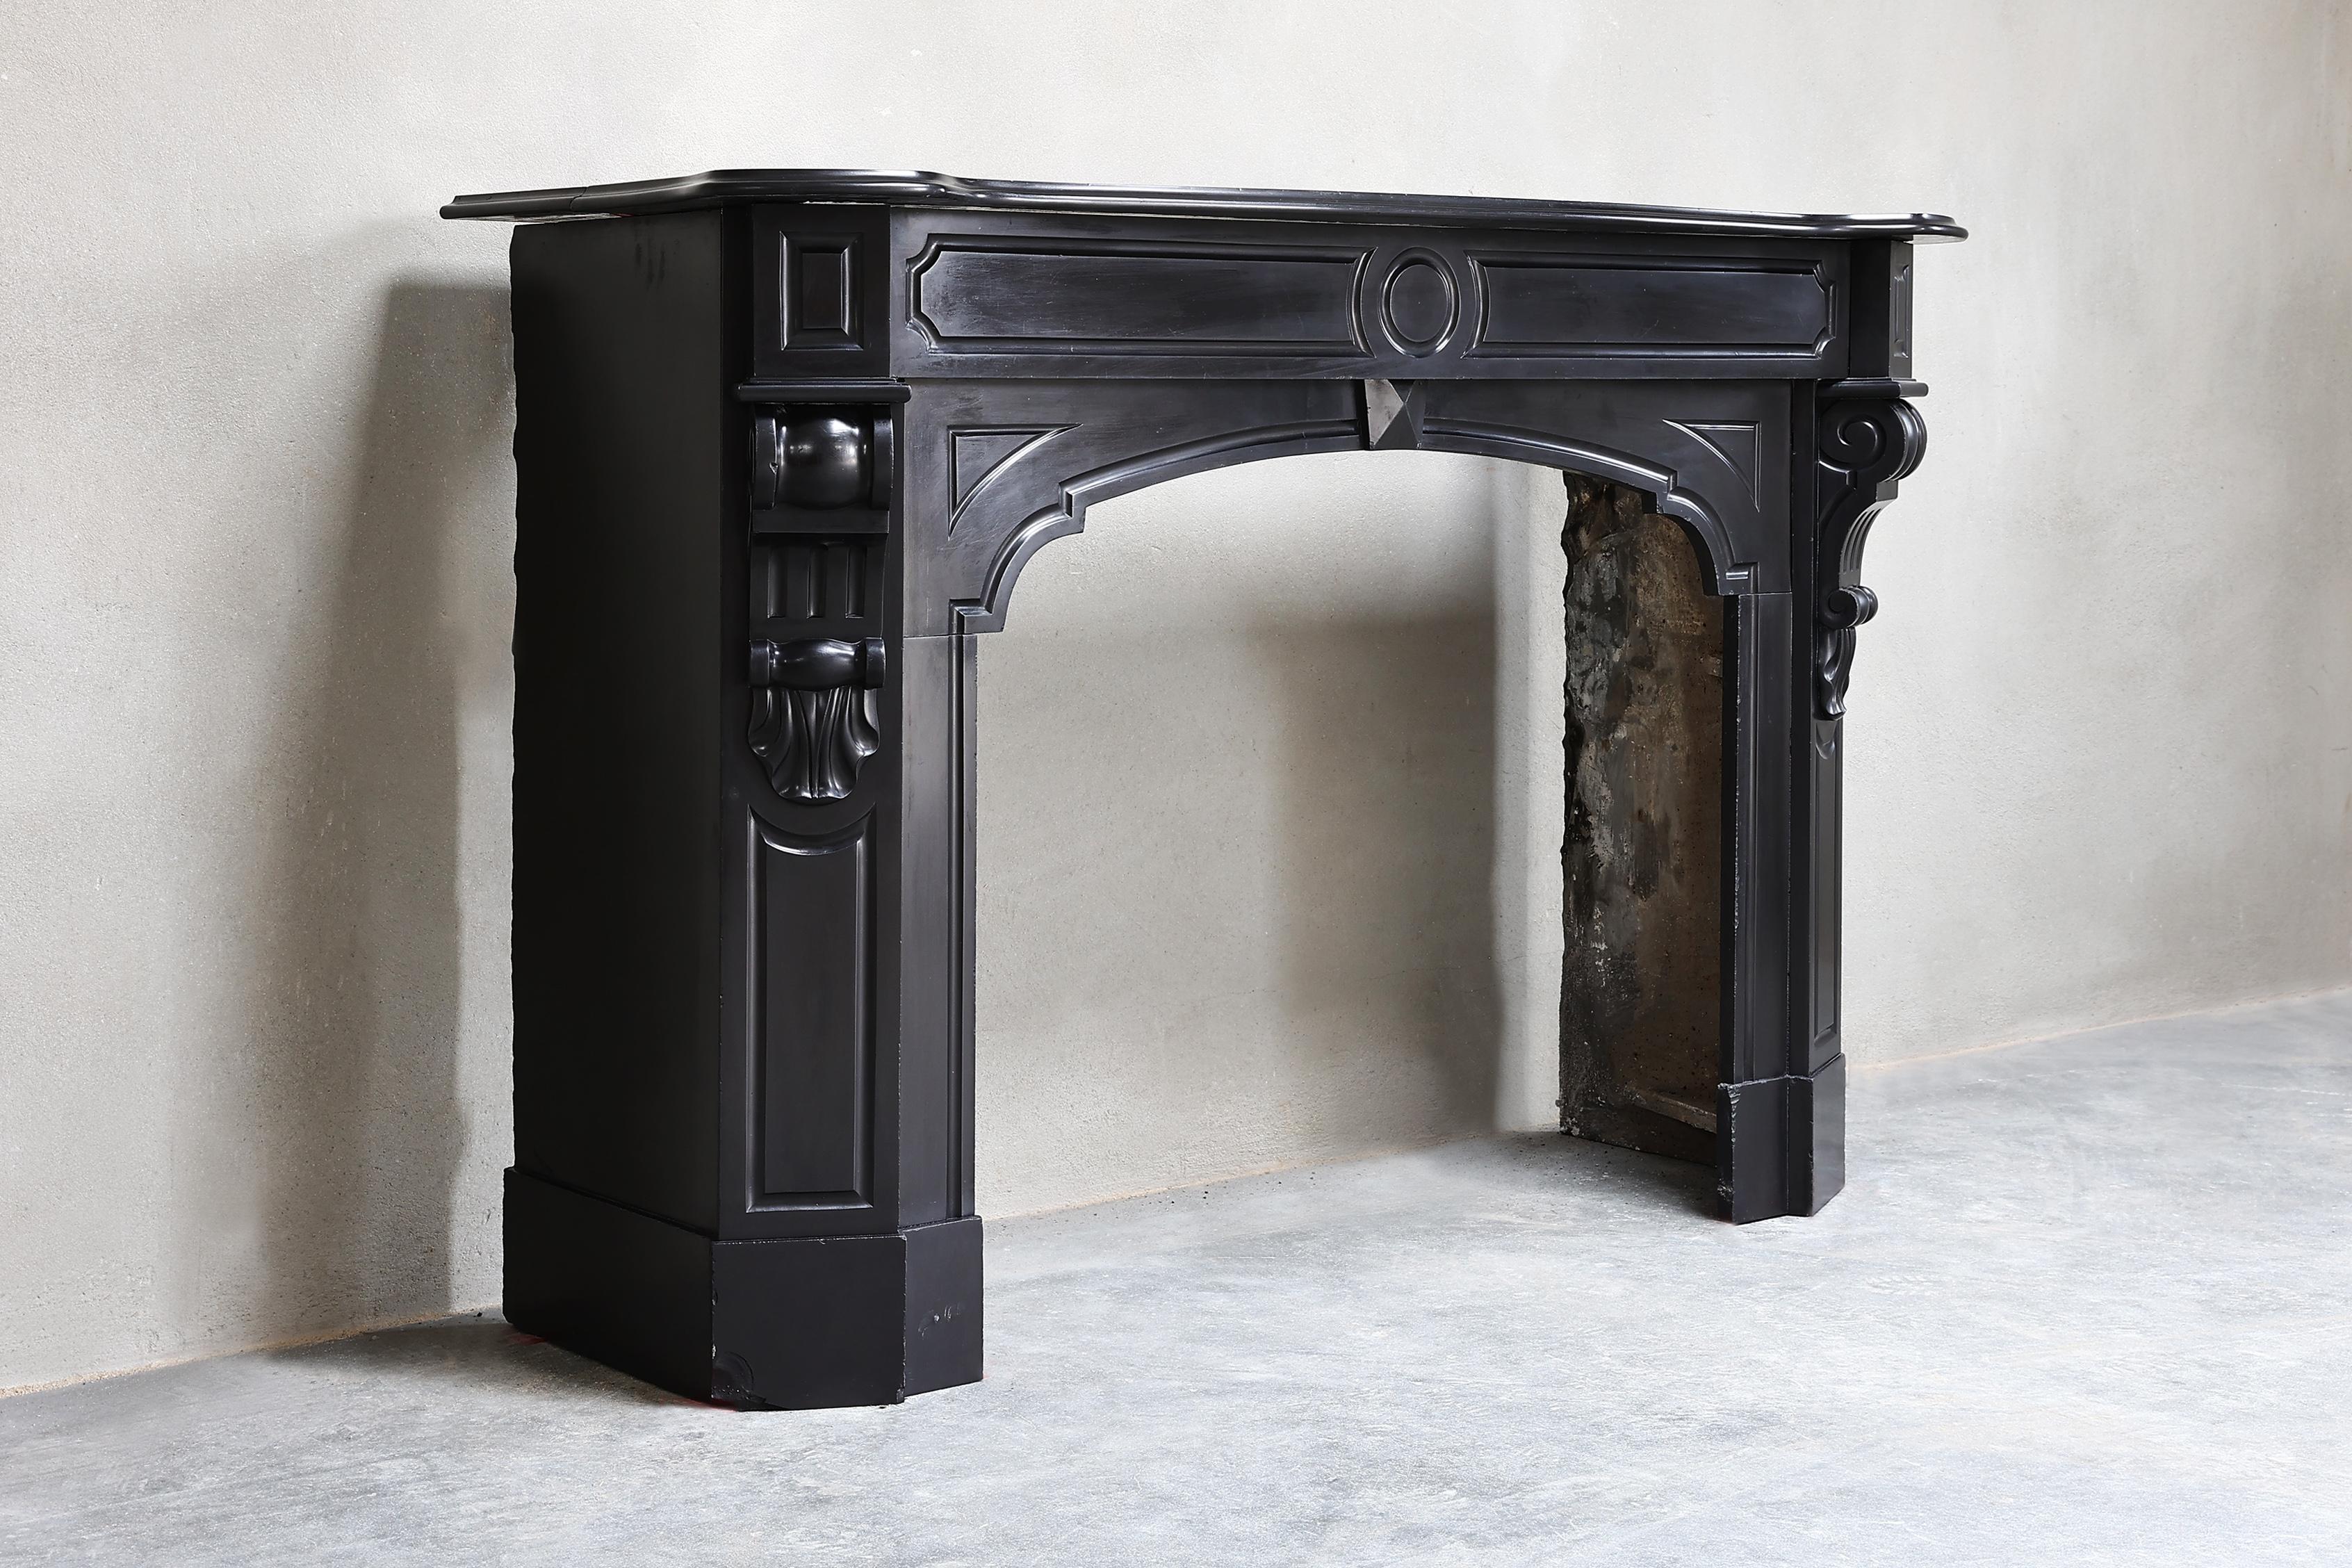 Very chic antique fireplace of Noir de Mazy marble from the 19th century! The elegant fireplace has beautiful ornaments in the front part and on the legs. A beautiful decorative fireplace that looks great in a classic or modern interior!.